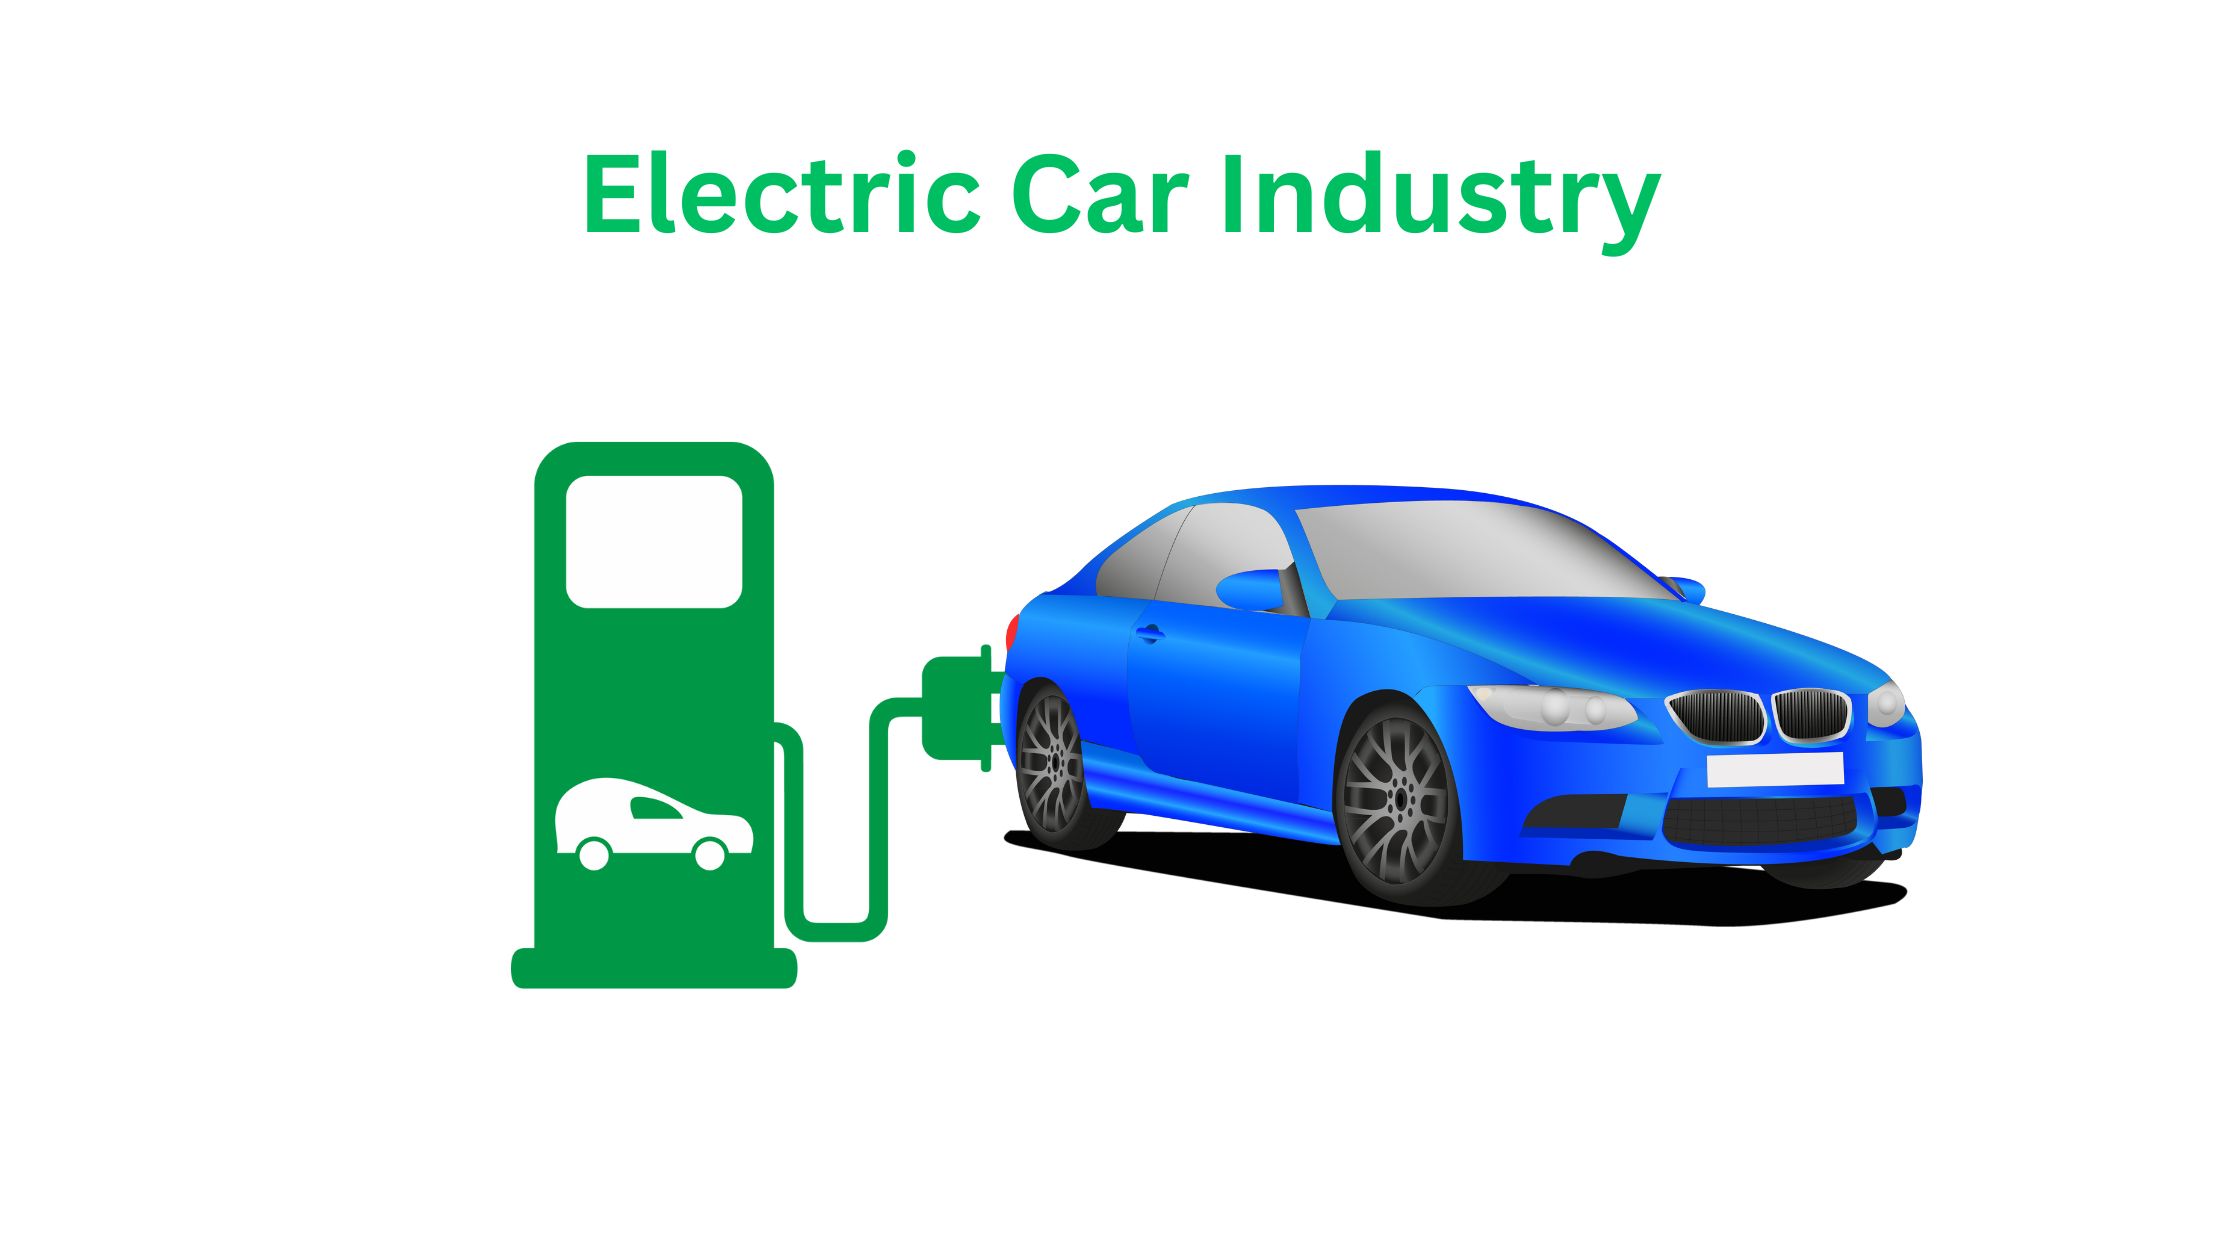 Electric car industry